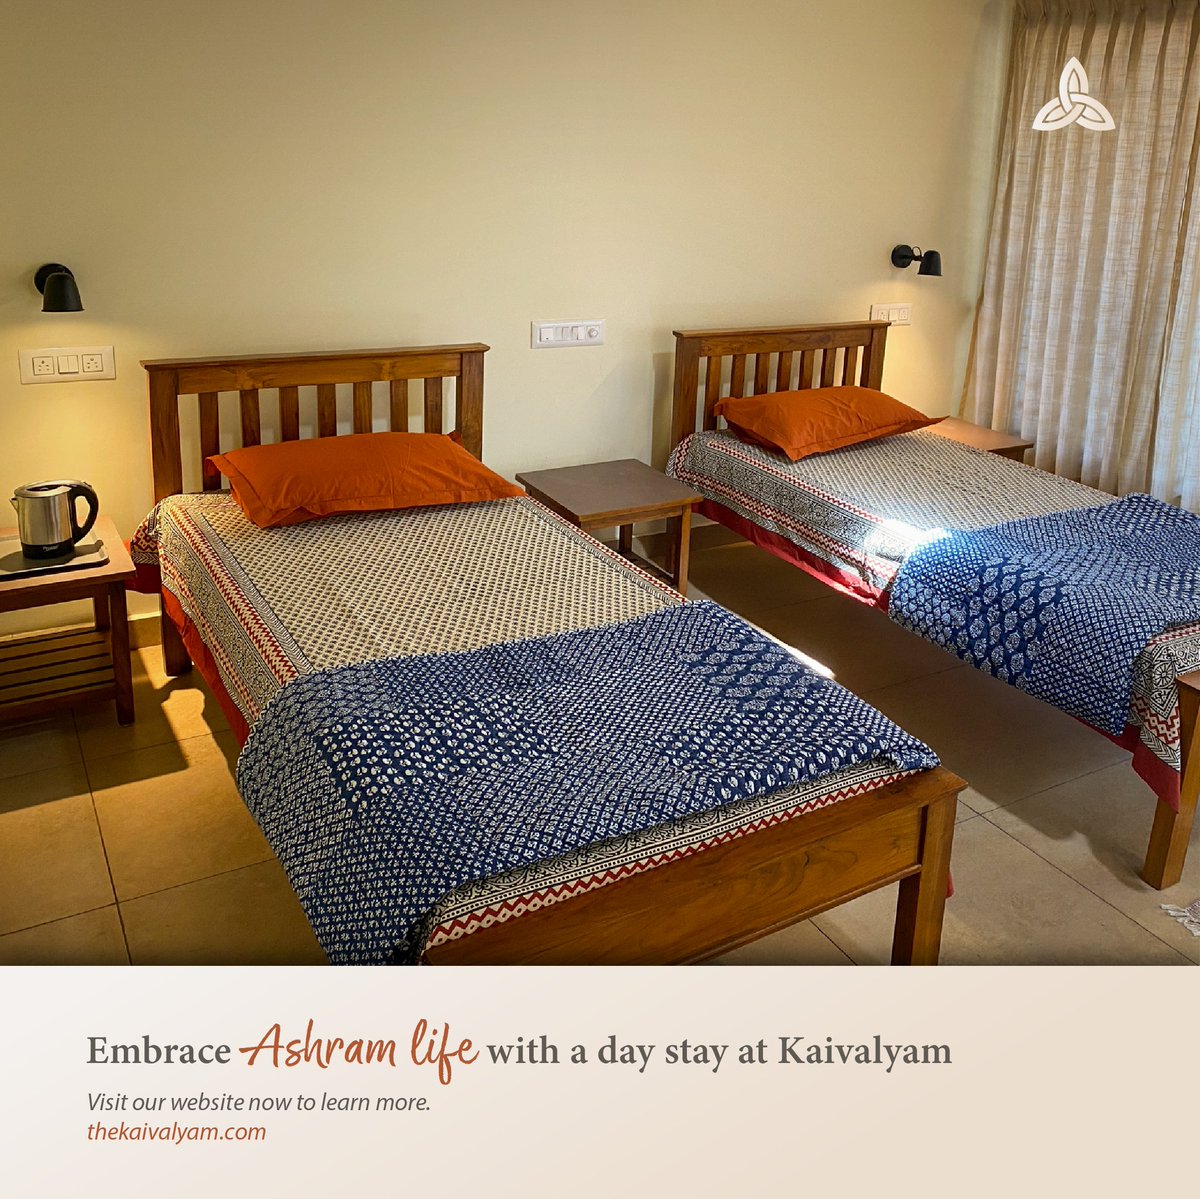 Book your stay for the day at the ashram now and embark on a journey of self-discovery! 

Visit our website to learn more👇
thekaivalyam.com 

#KaivalyamFoundation #YogaCourse #Belgavi #Belgaum #Yoga #innerpeace